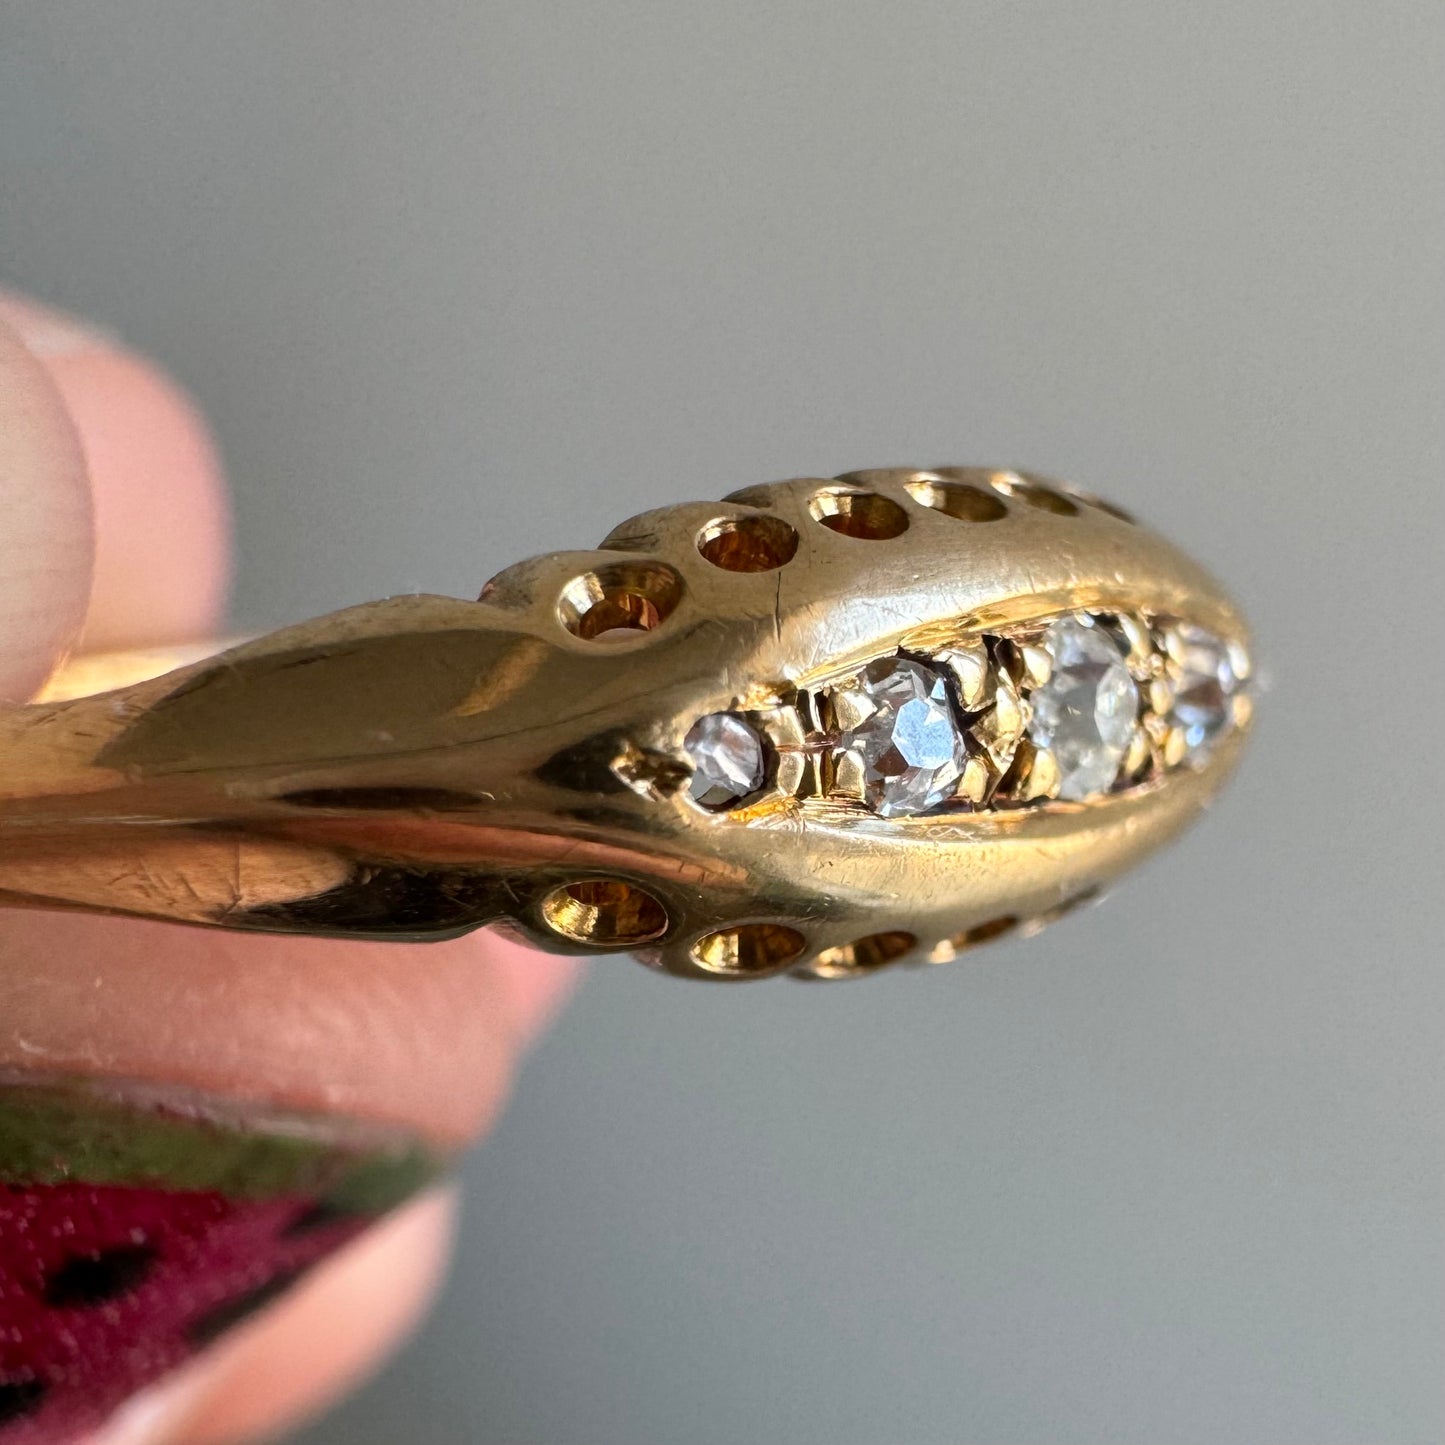 A N T I Q U E // 10/5/21 boat / 18k and old cut diamond boat ring / size 8.25